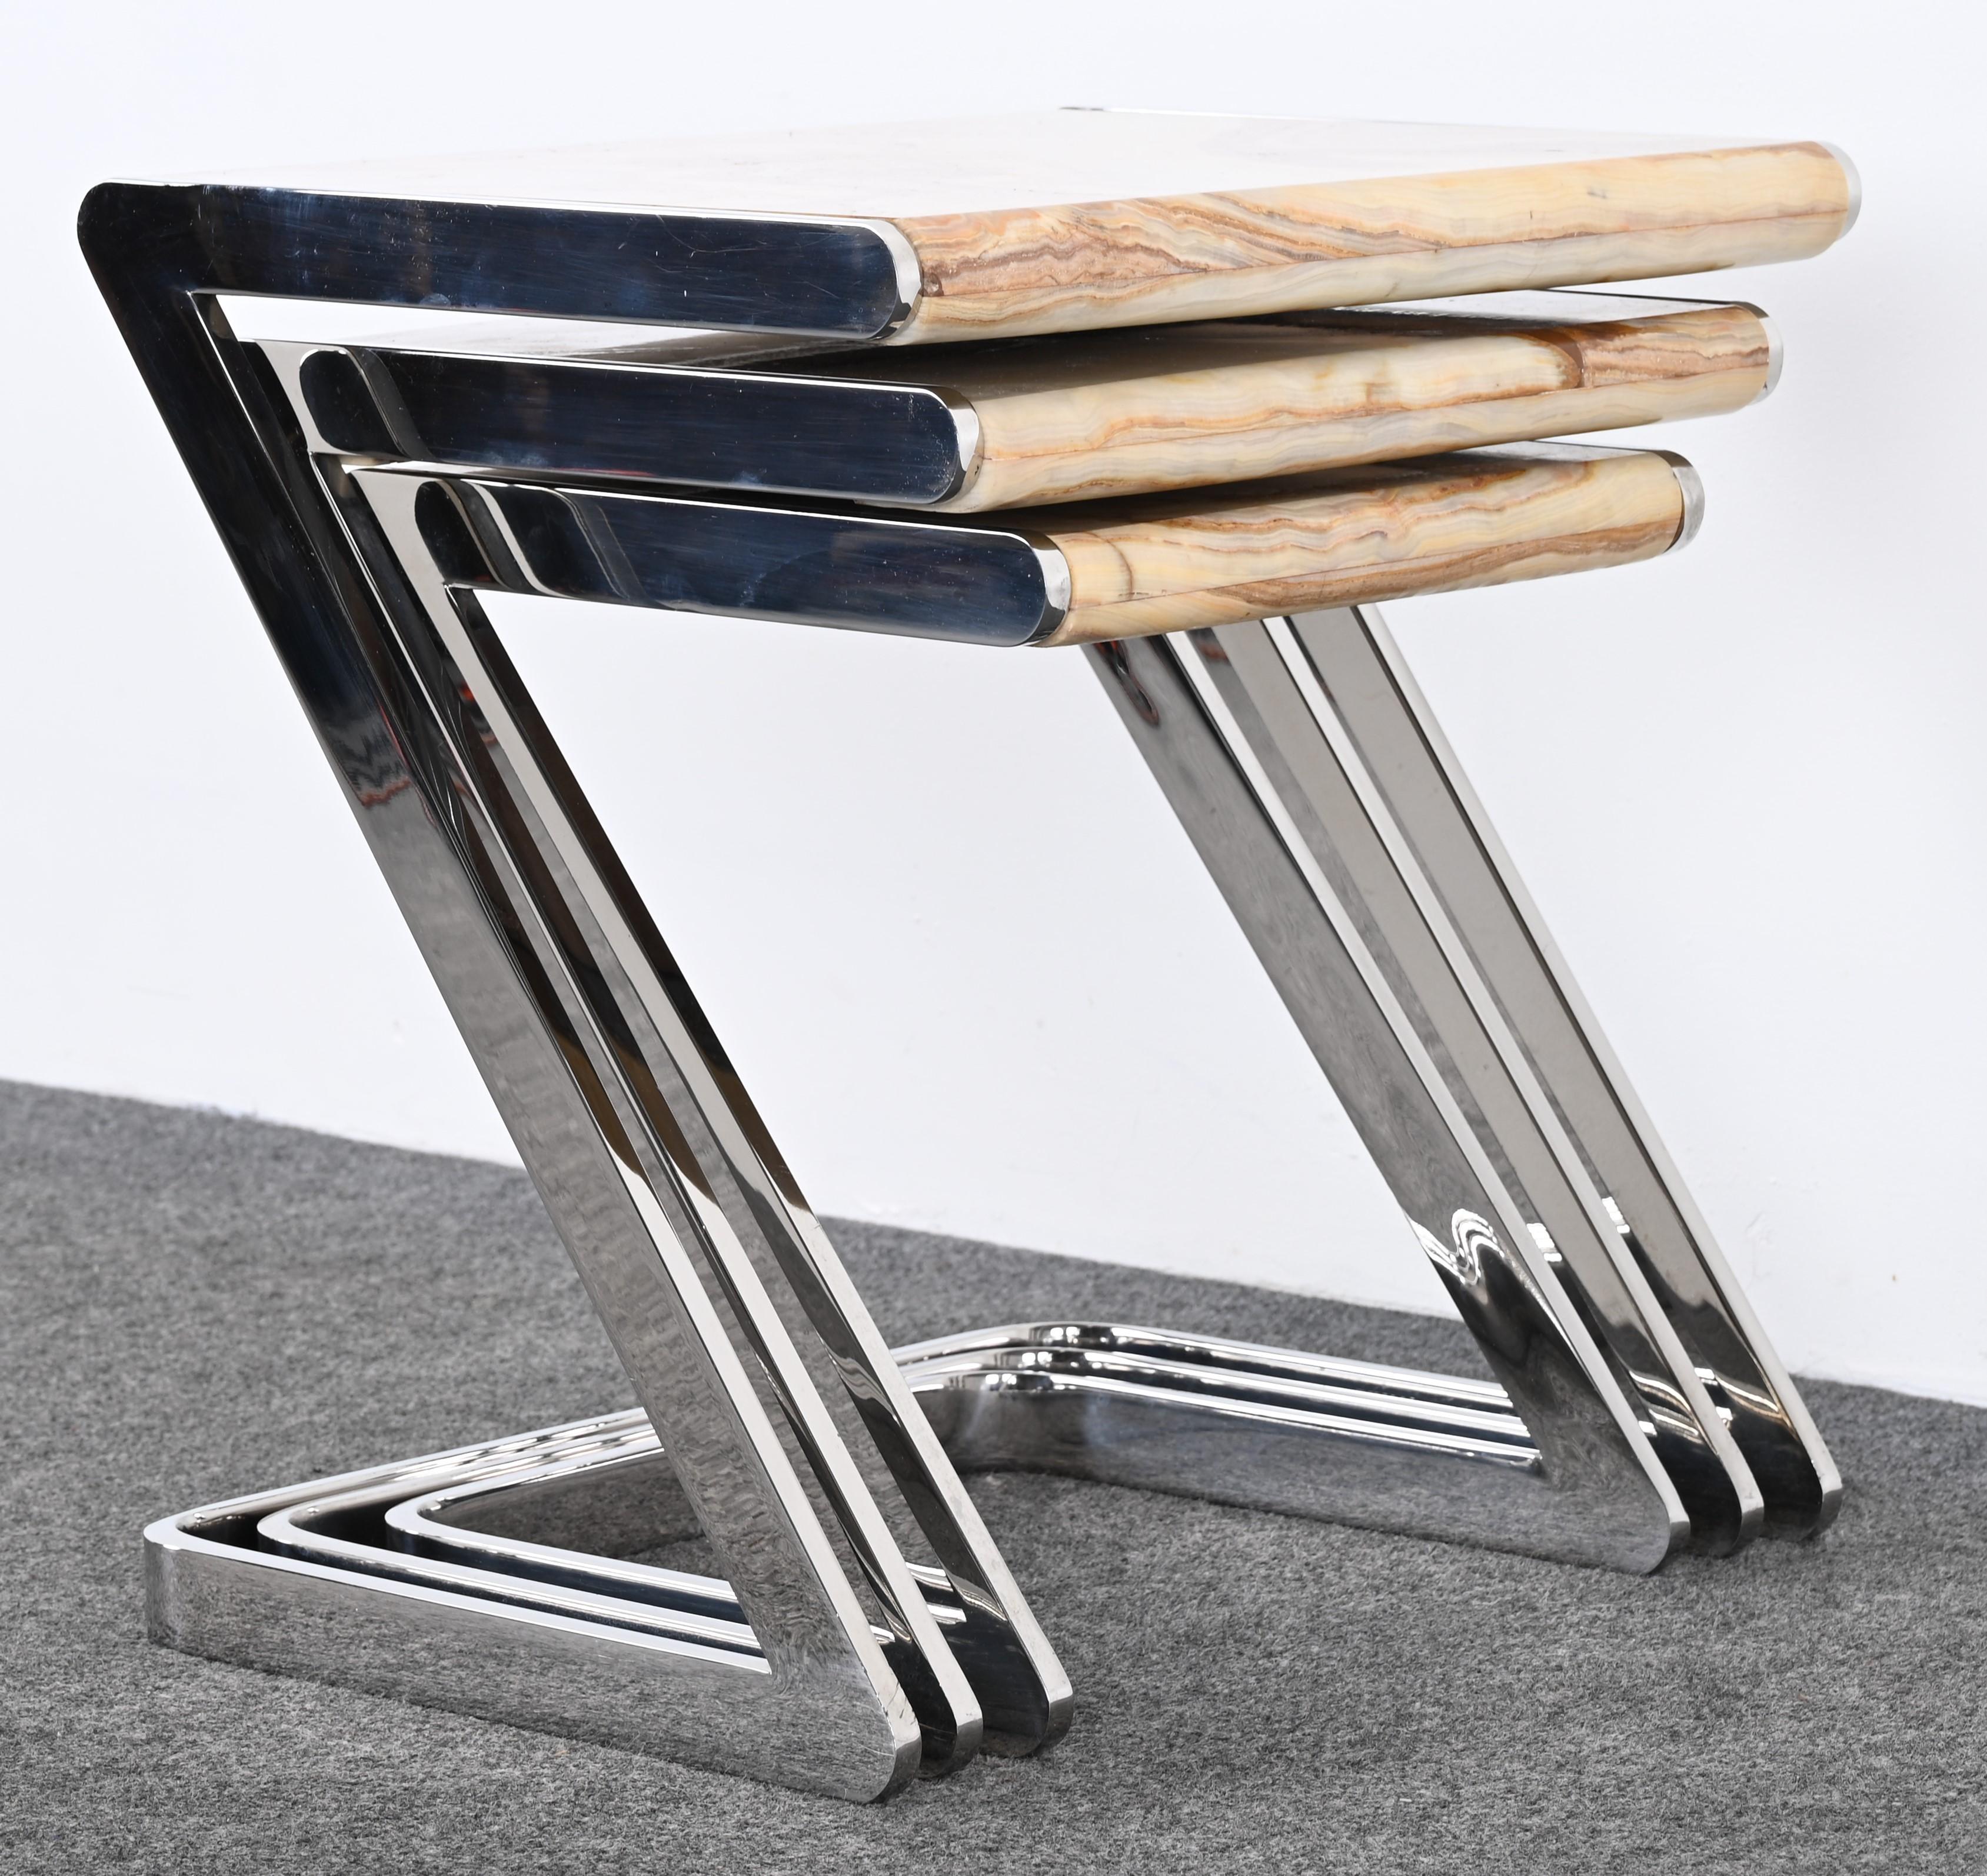 Onyx and Stainless Steel Nesting Tables by Brueton, 1980s For Sale 9